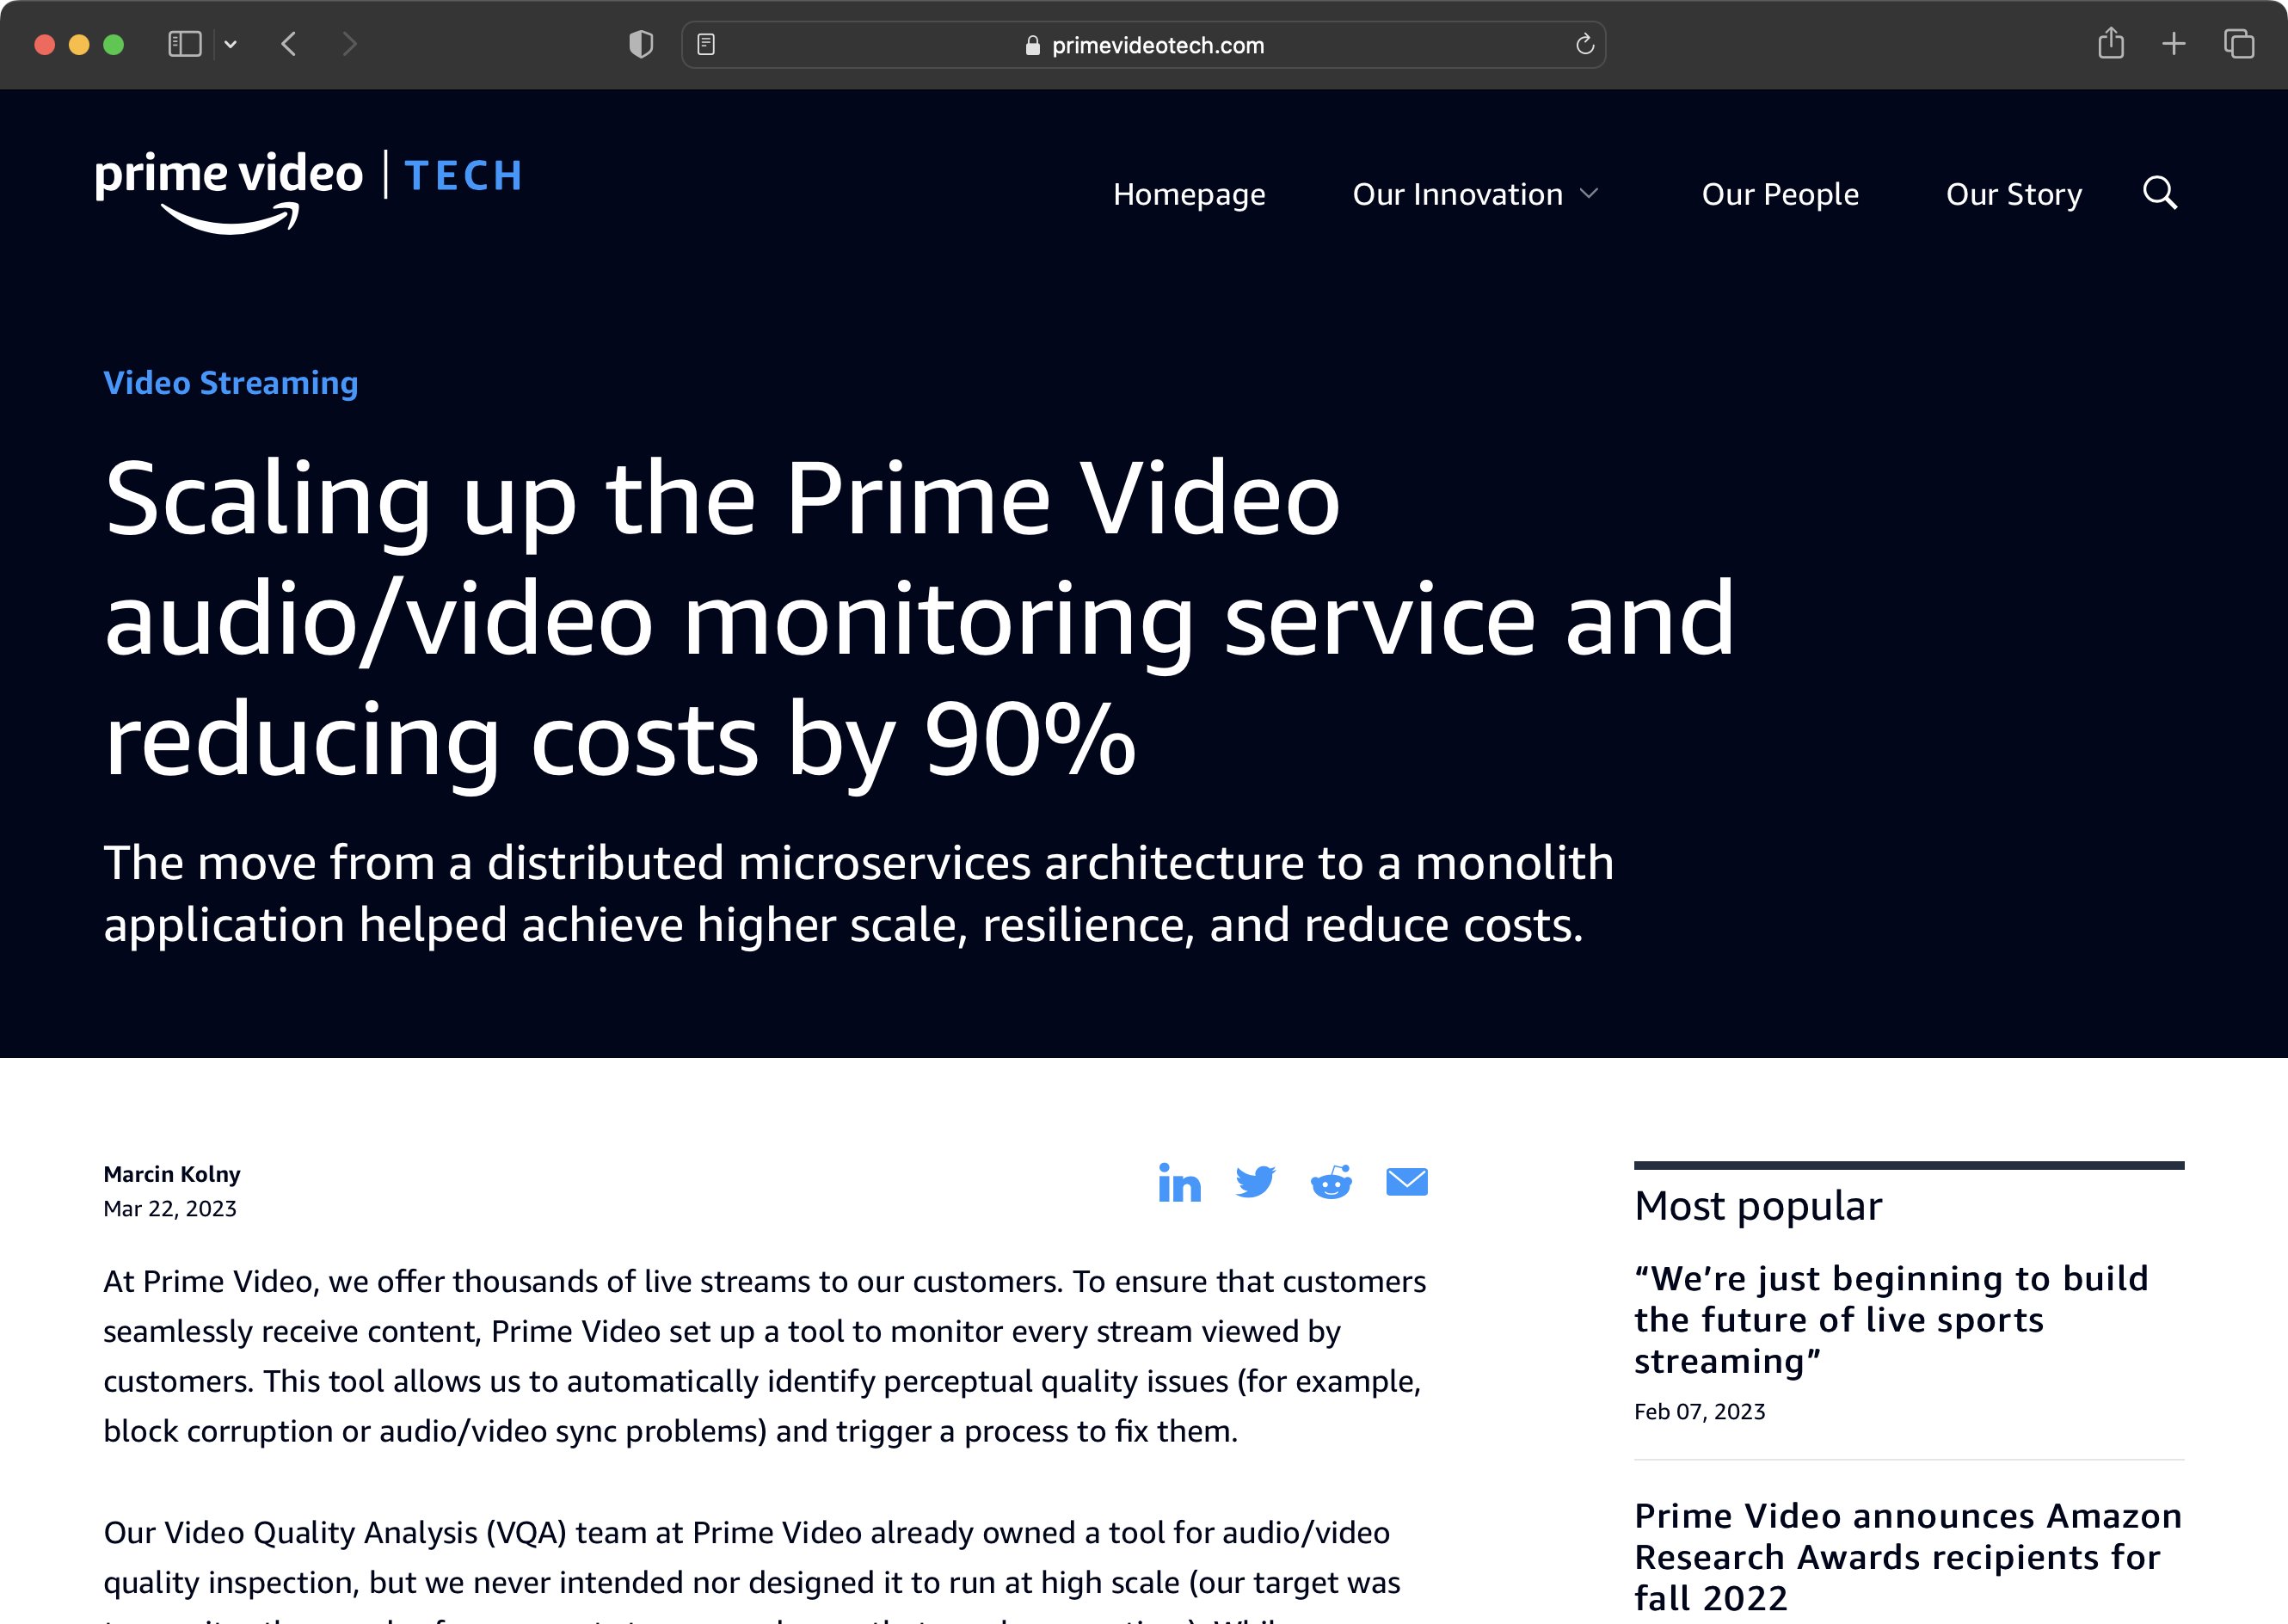 Kelsey Hightower on X: The  Prime Video team was able to reduce cost  by moving from Serverless backed by Lambda to monoliths running on VMs.  Moving our service to a monolith